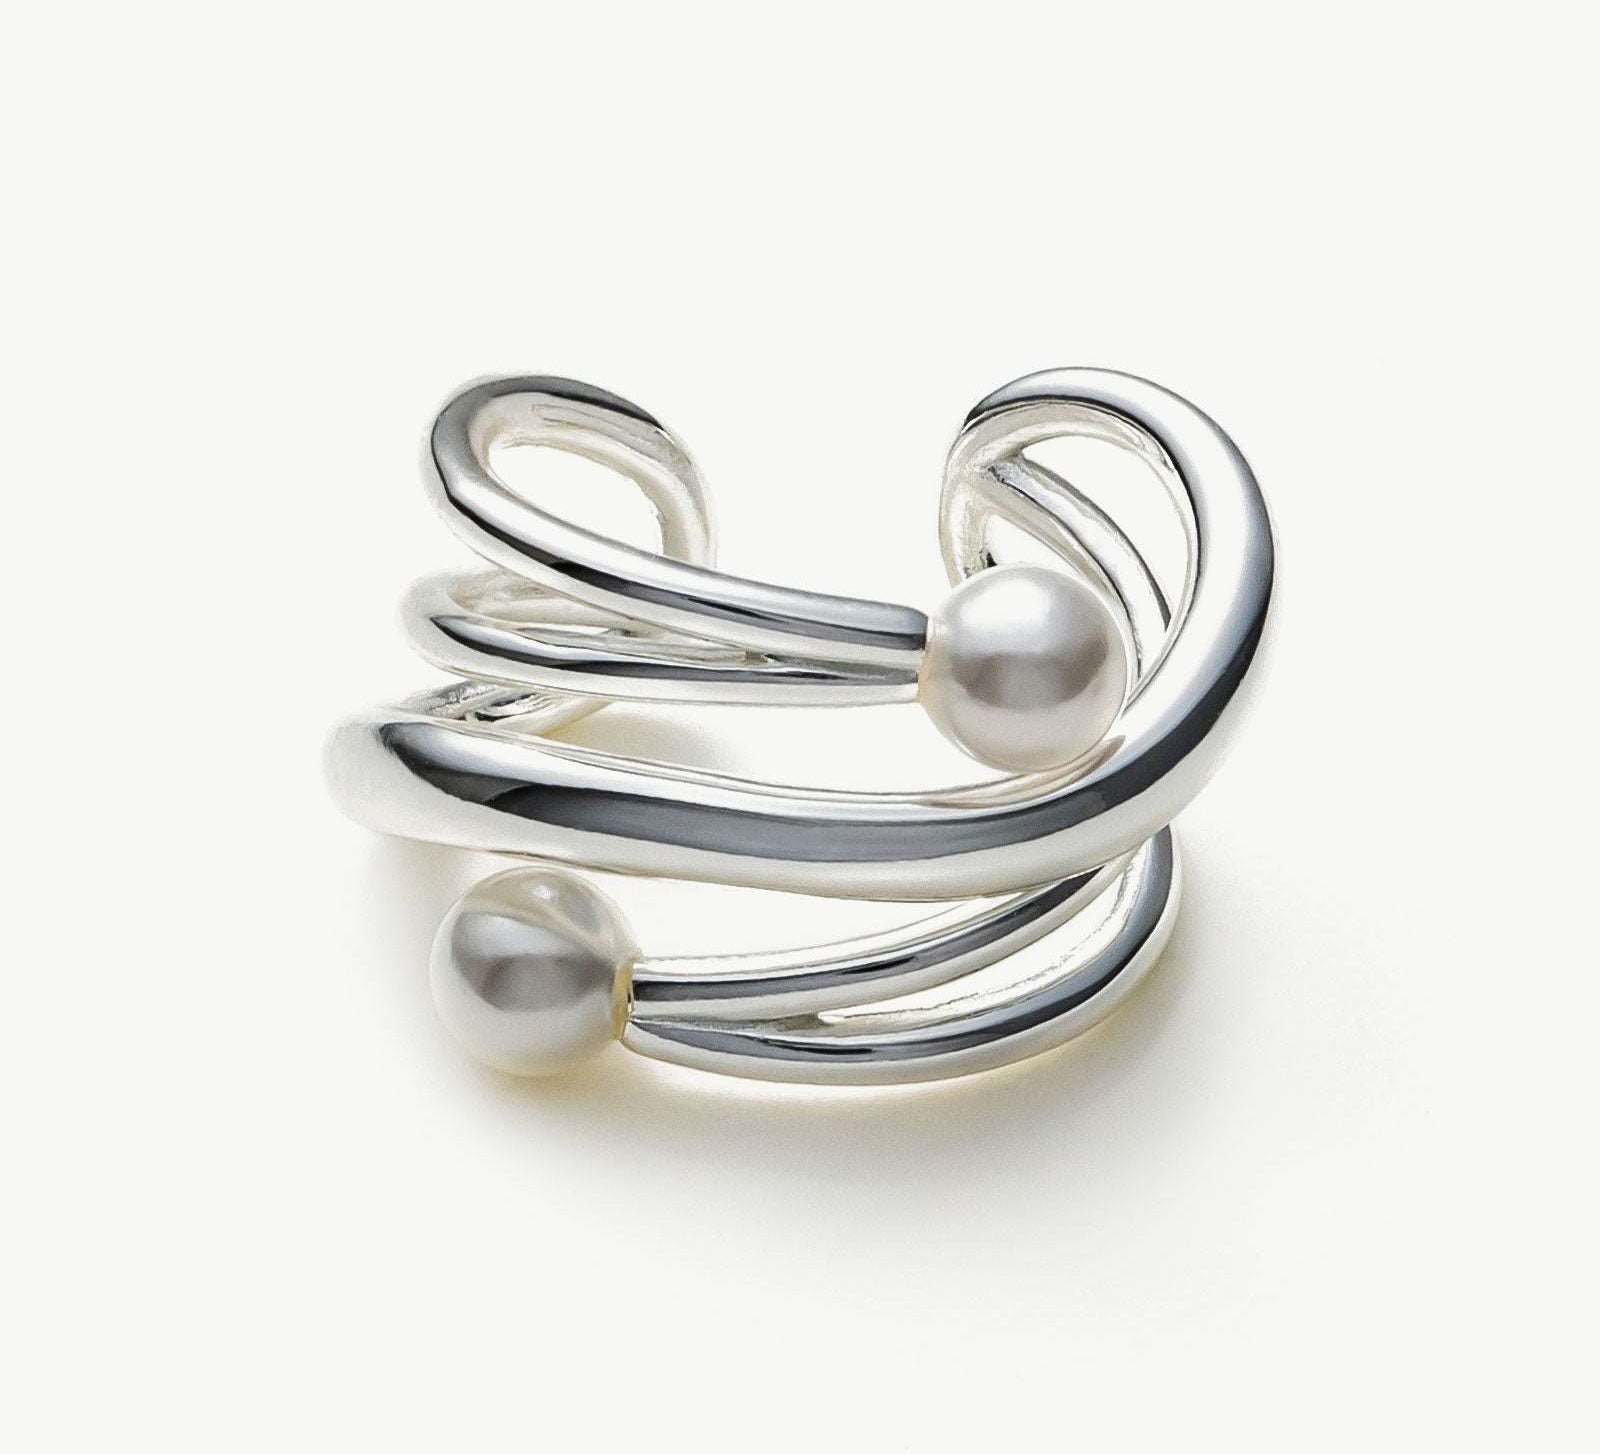 Silver Claw Pearl Ear Cuff, a sleek and modern accessory that adds a touch of contemporary elegance to your ear